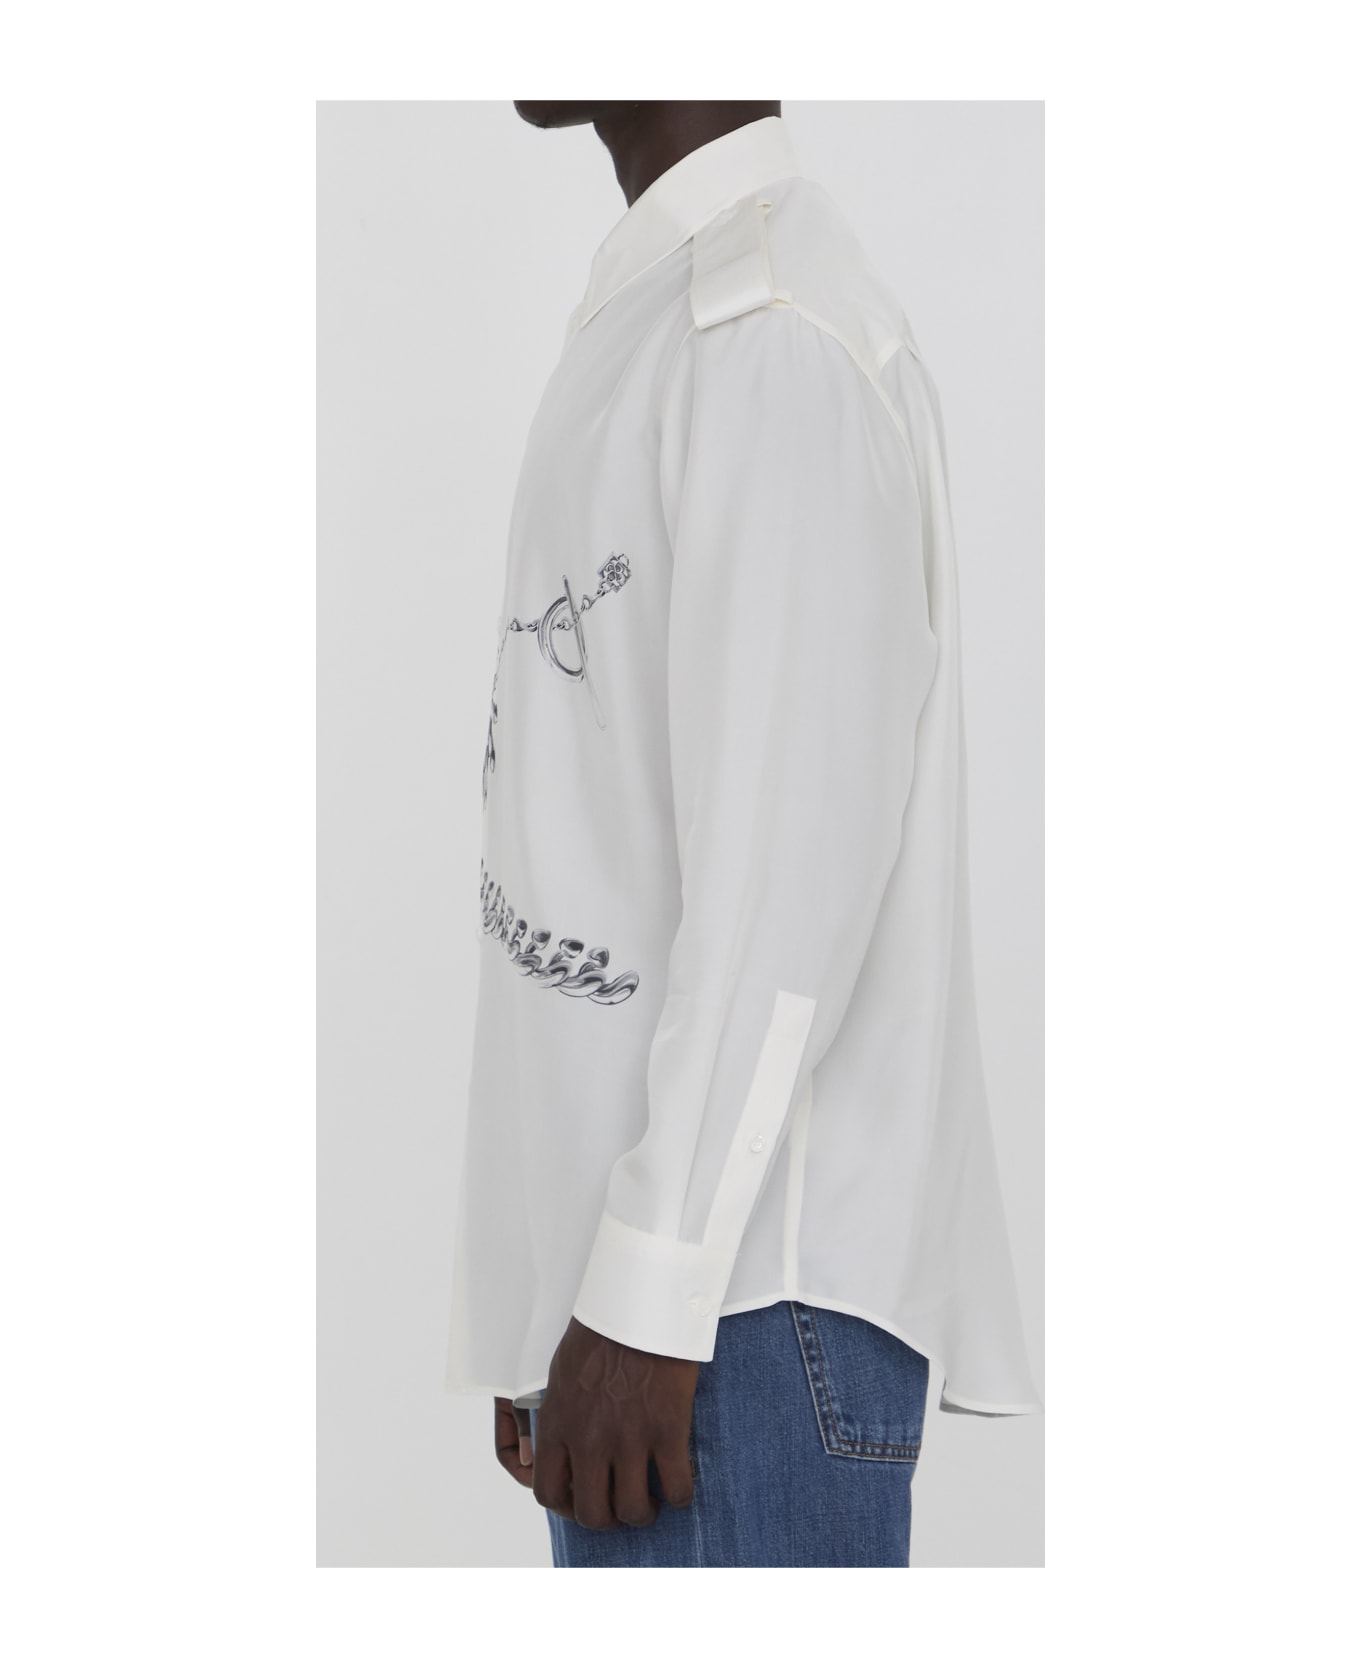 Burberry Shirt With Knight Motif - WHITE